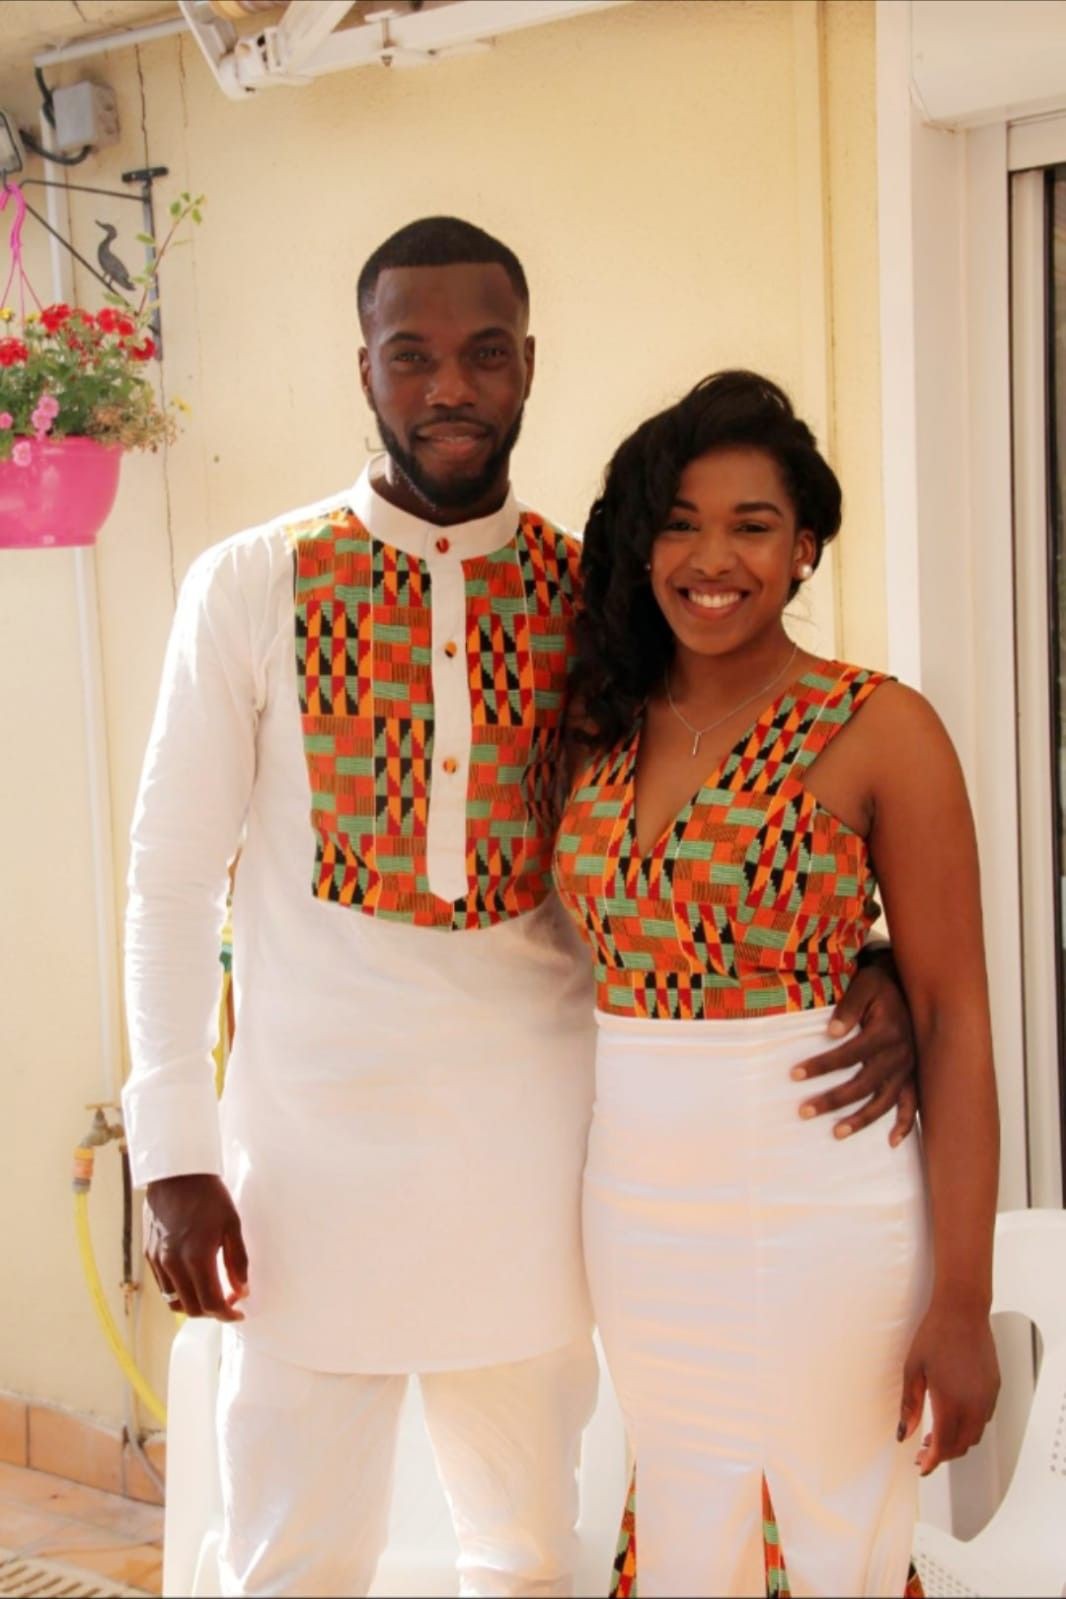 Buy > couple matching ankara outfits > in stock